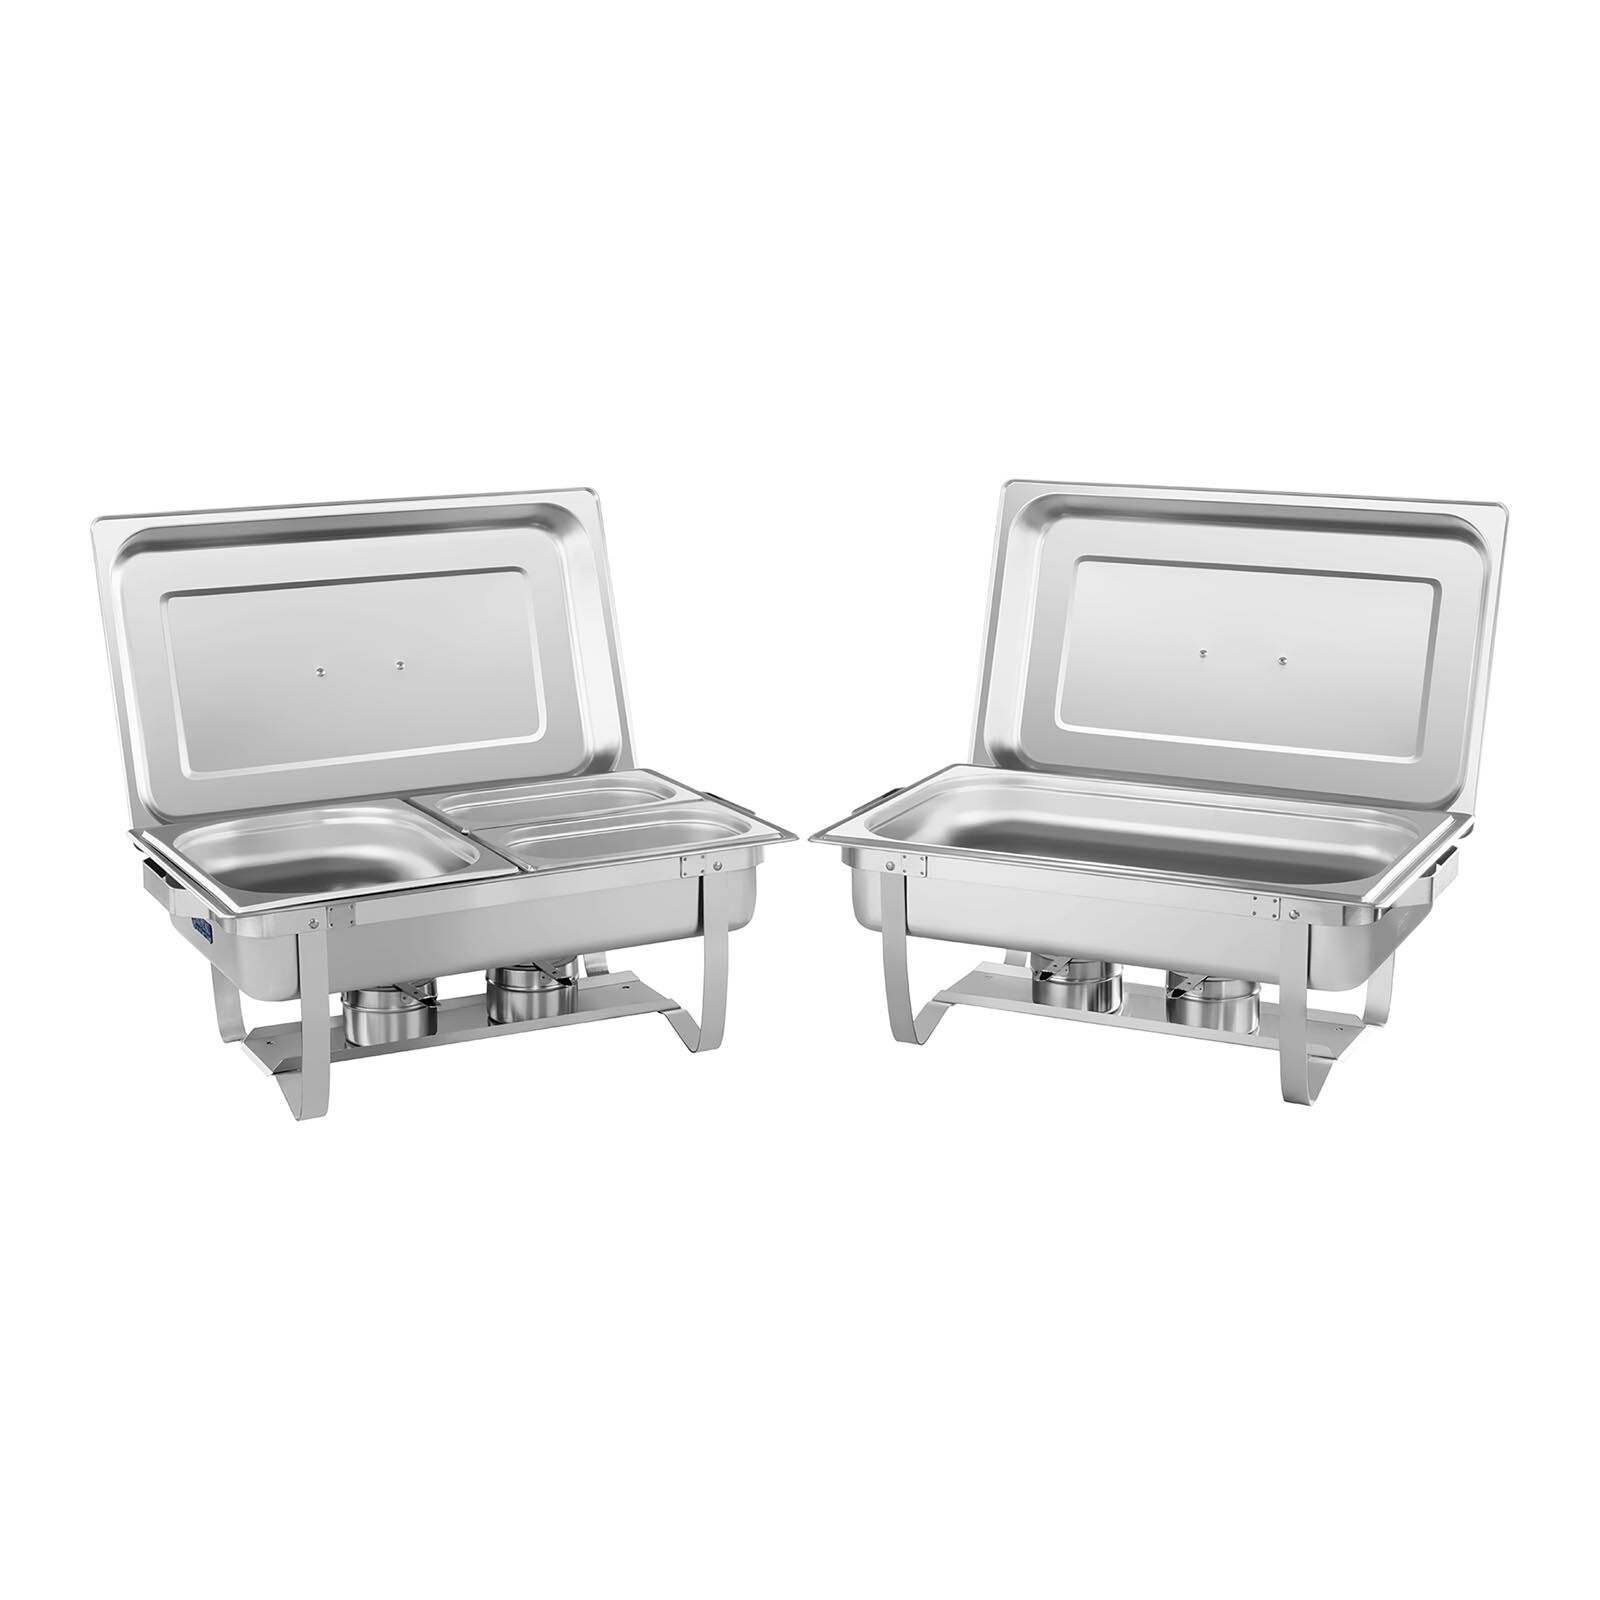 Royal Catering Chafing Dish Set 2-teilig - 53 cm - inkl. GN Behälter 10010880